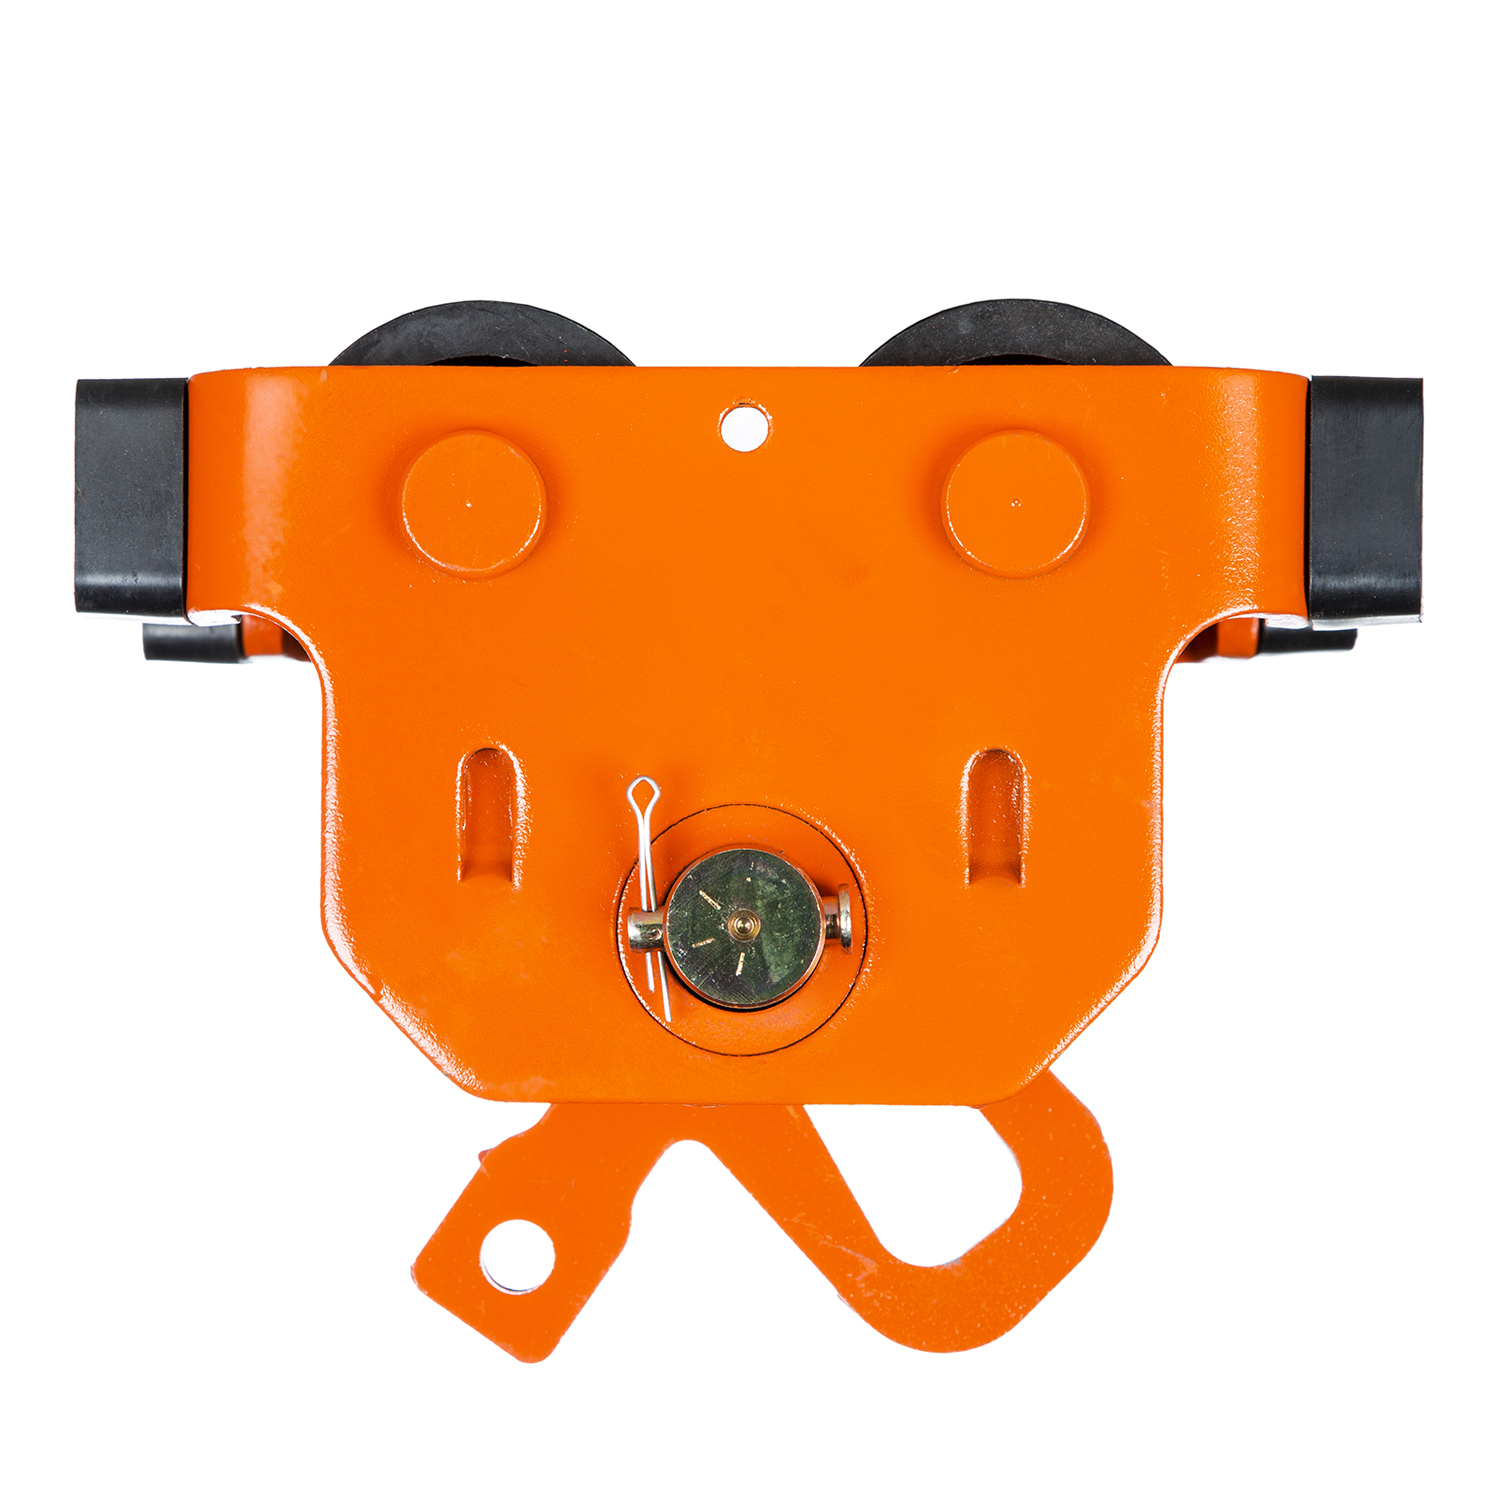 Prowinch 1 Ton I Beam Manual Pushing Trolley with rubber bump stops